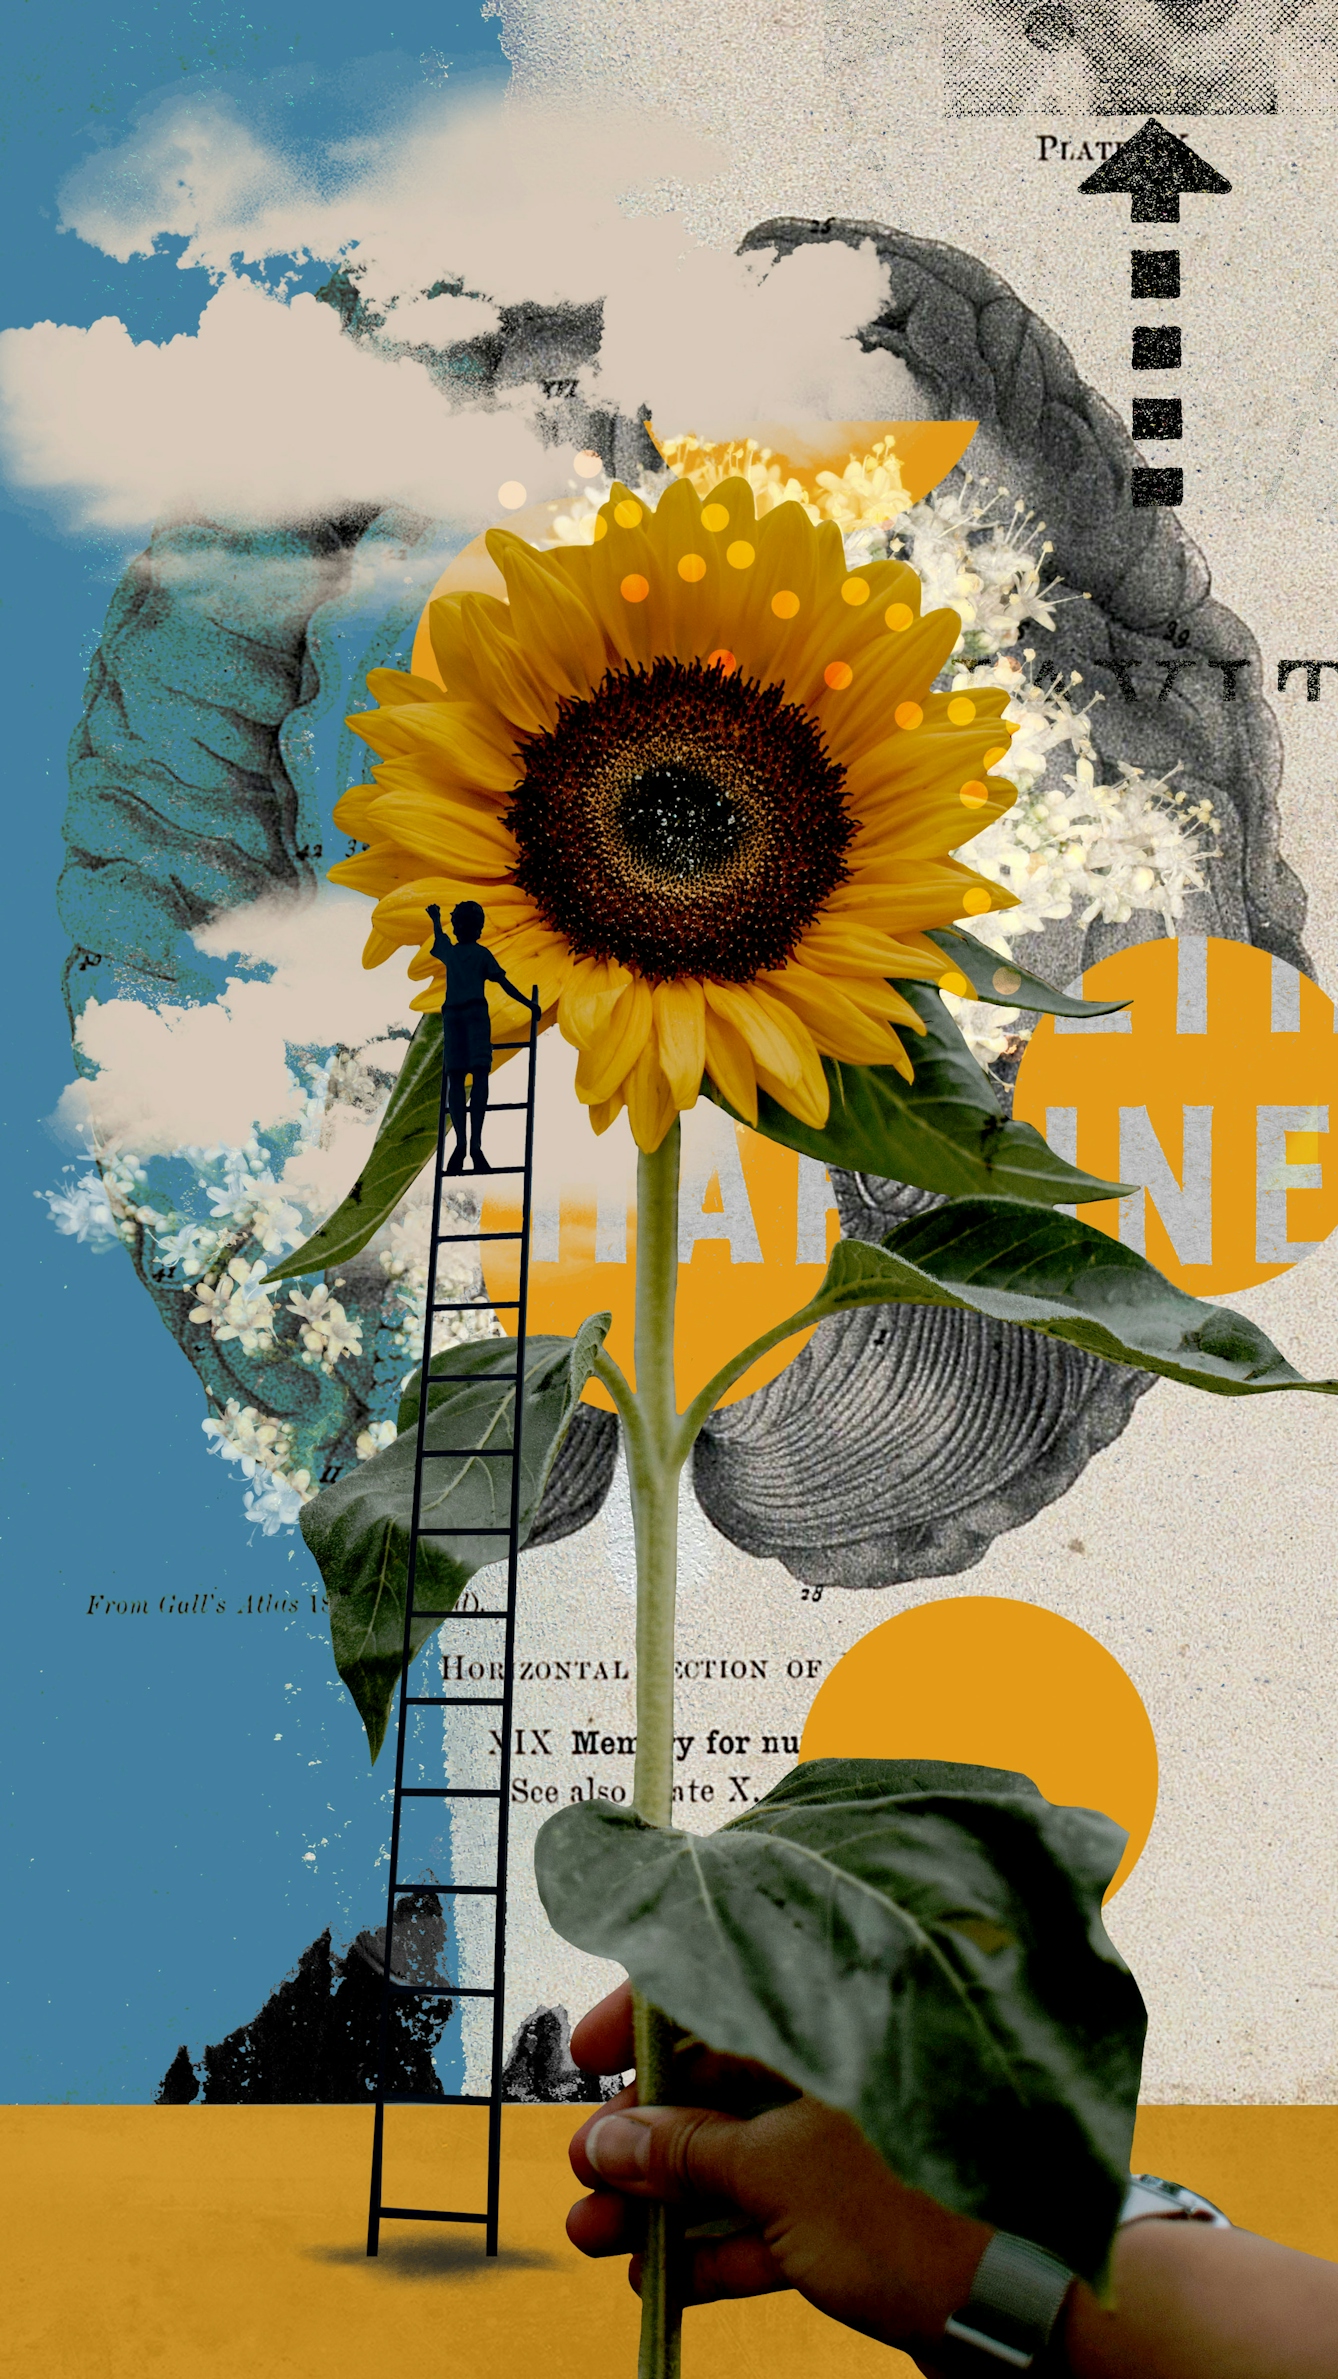 Colourful collage artwork with various elements.

The central image is a large sunflower, held by a hand. There is a black ladder stretching to the sunflower with a person standing on it. 

Behind the sunflower is an etching of the human brain and an arrow pointing upwards. The left side of the image has a blue cloudy sky as the background. 